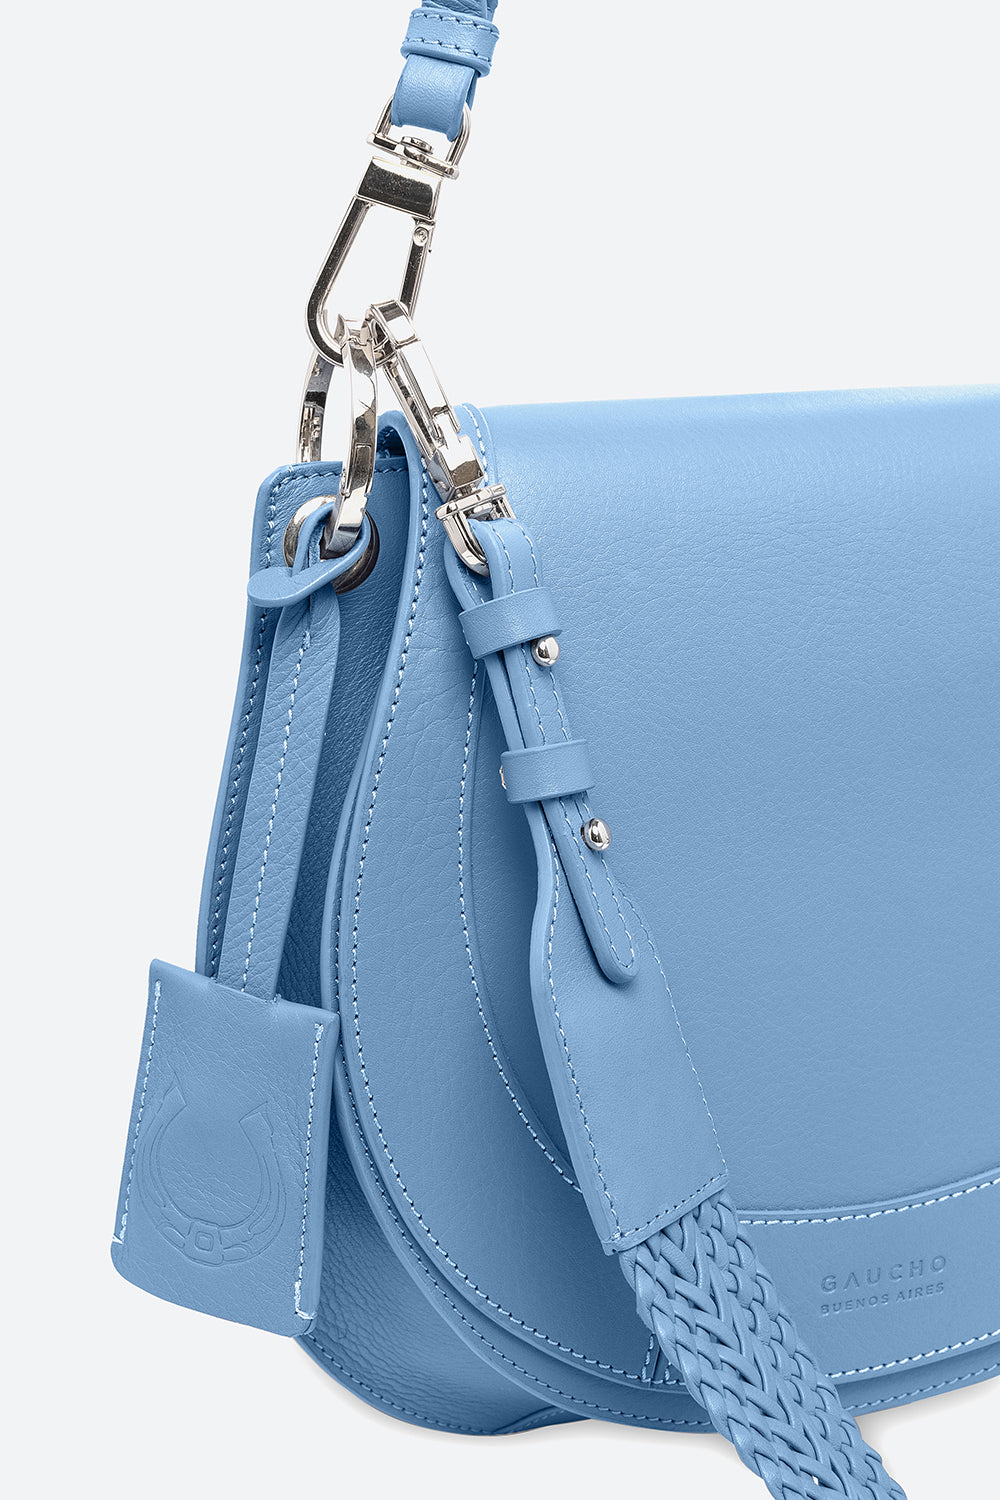 The Lucky Bag, Leather Saddle Bag in Sky Blue